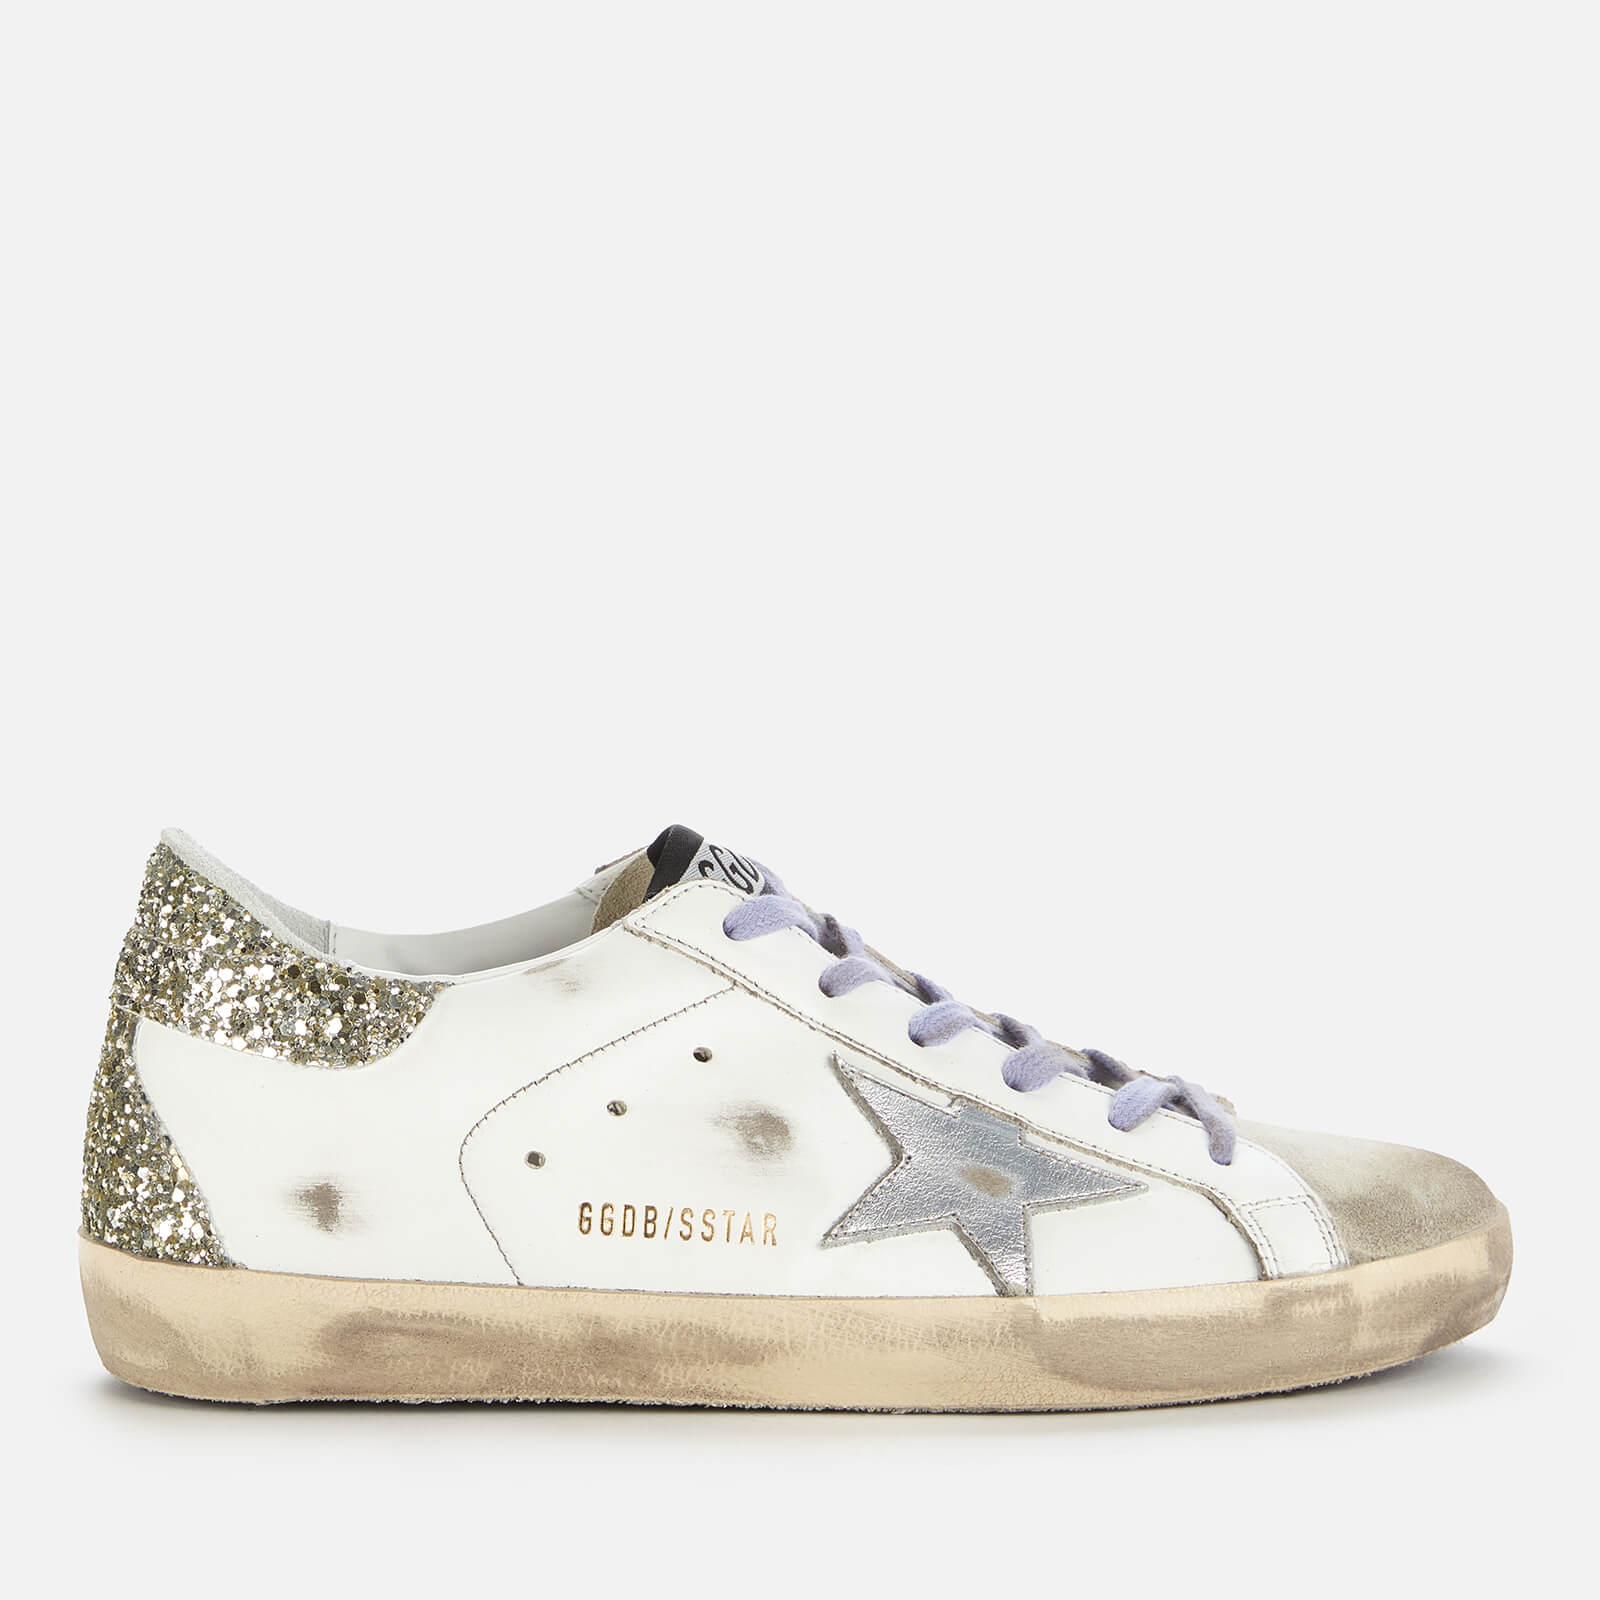 Golden Goose Deluxe Brand Women's Superstar Leather Trainers - White/Ice/Silver - UK 3